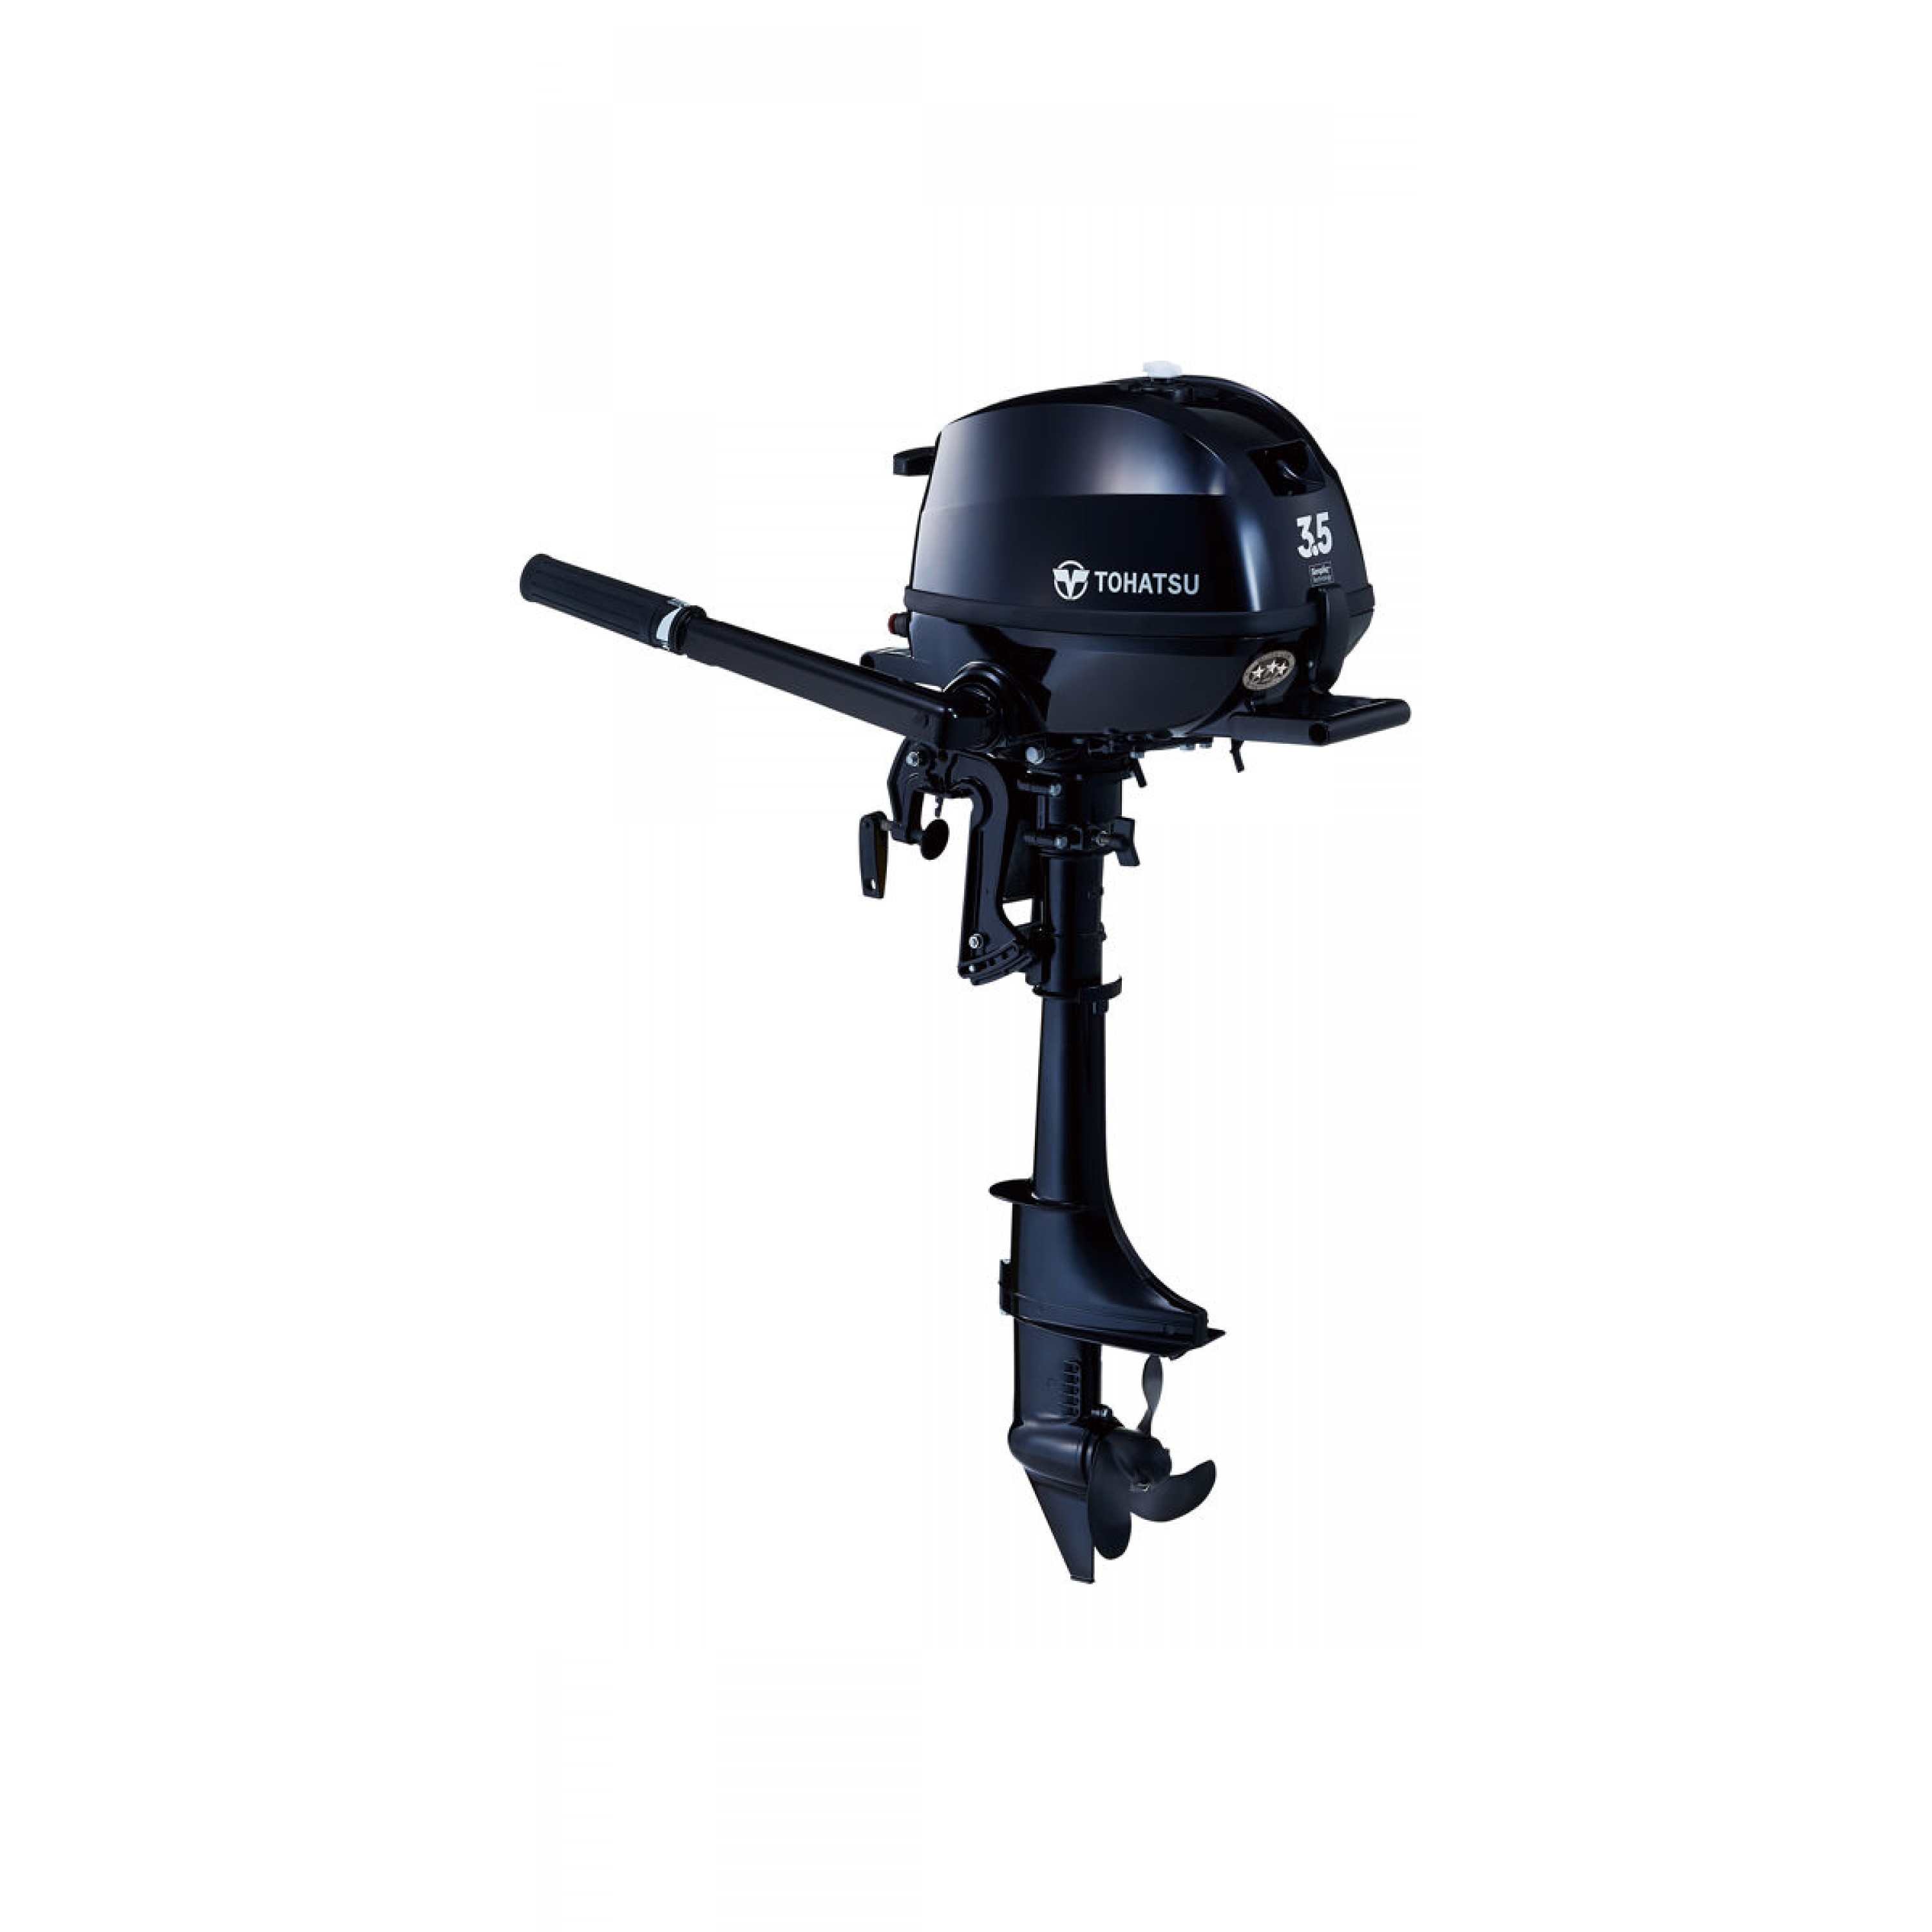 3.5 HP, TOHATSU OUTBOARD, MFS3.5CL, CARB, 20IN, TILLER, INTEGRAL FUEL TANK, MANUAL START,